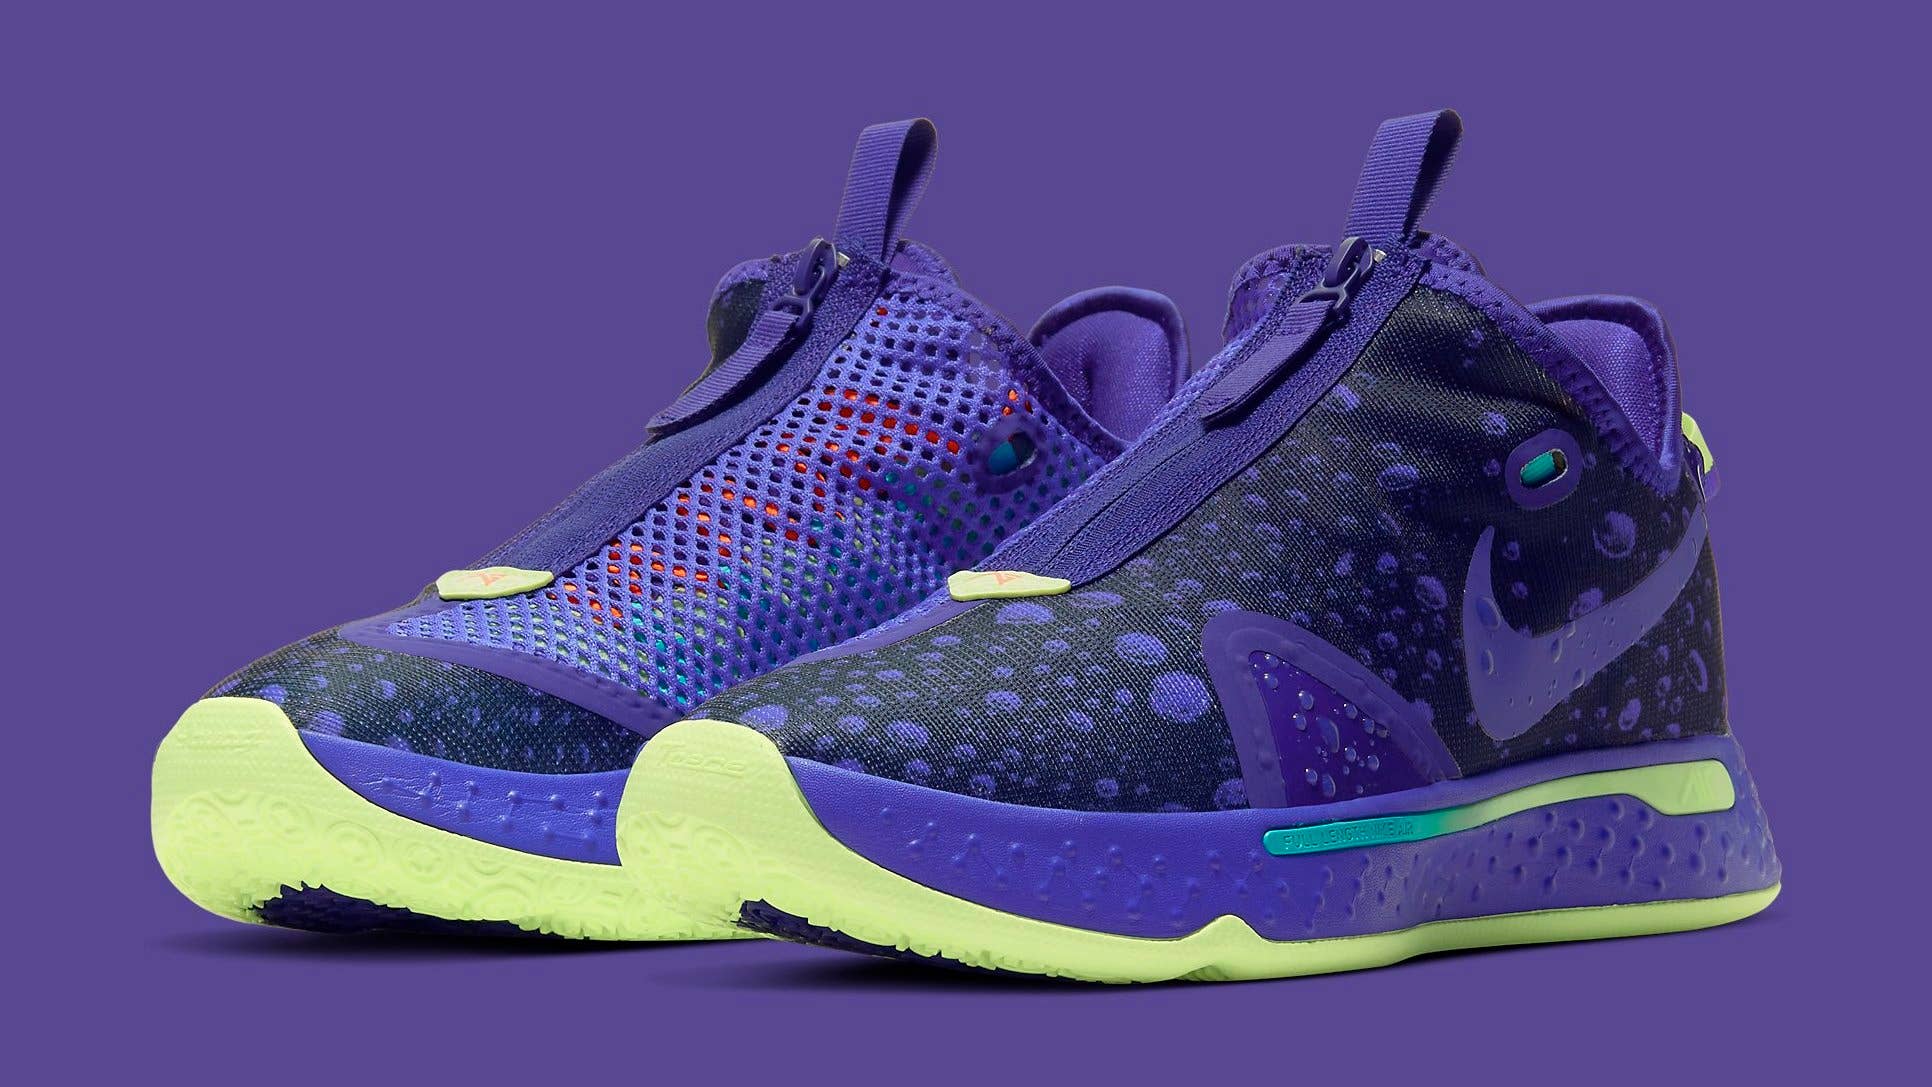 Nike & Gatorade Partner With Paul George on New PG4 Collaboration